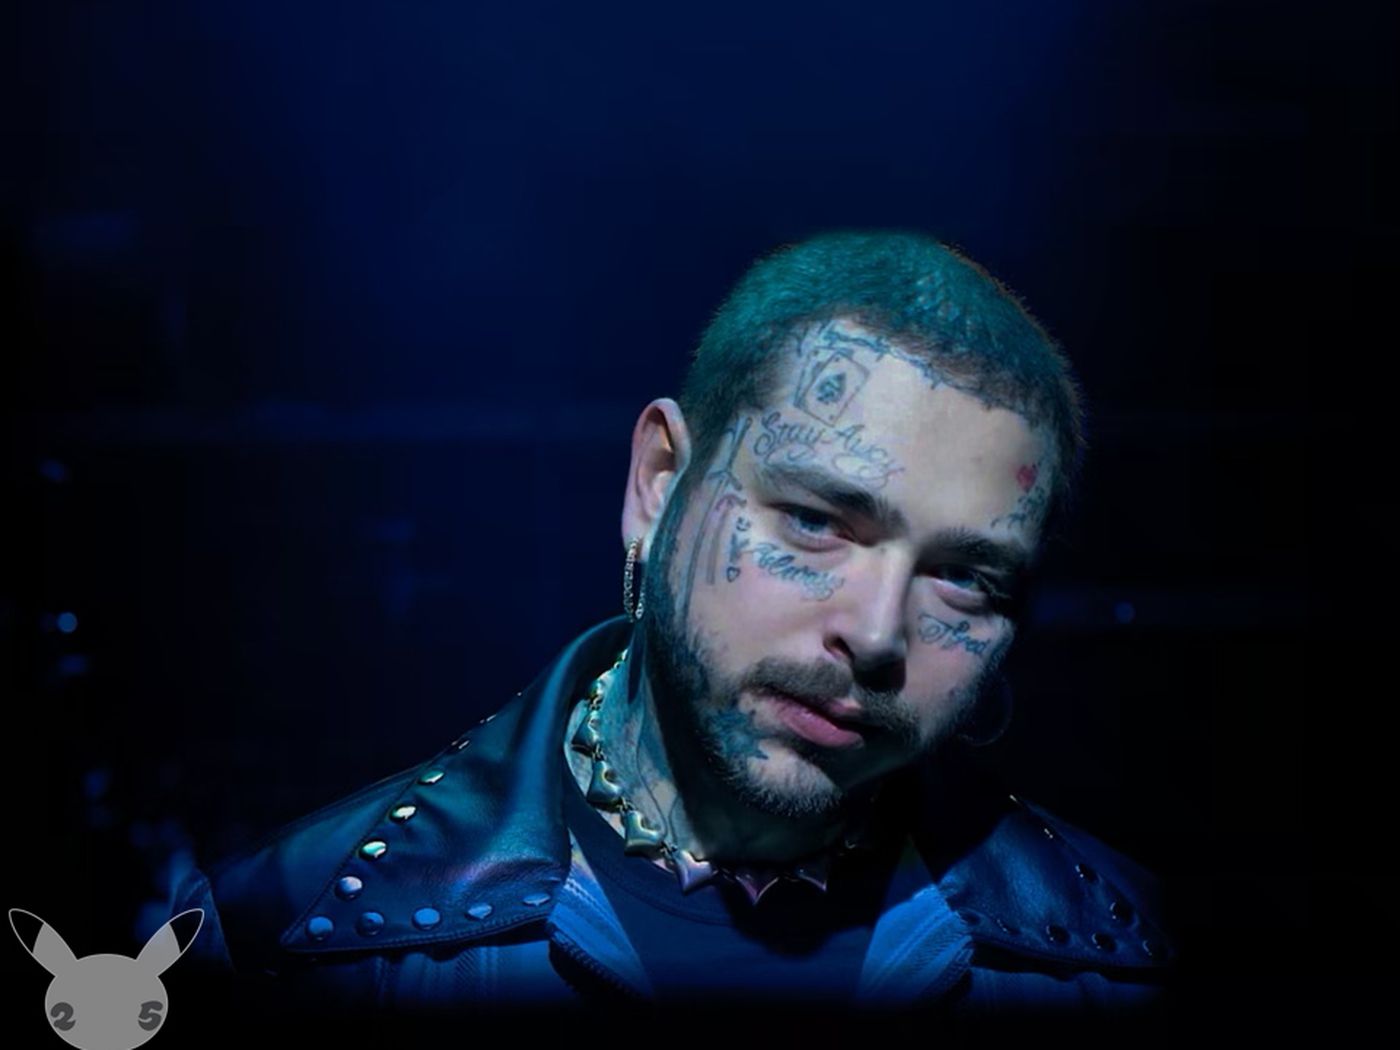 Listen to Post Malone cover Hootie & the Blowfish for Pokémon's 25th anniversary